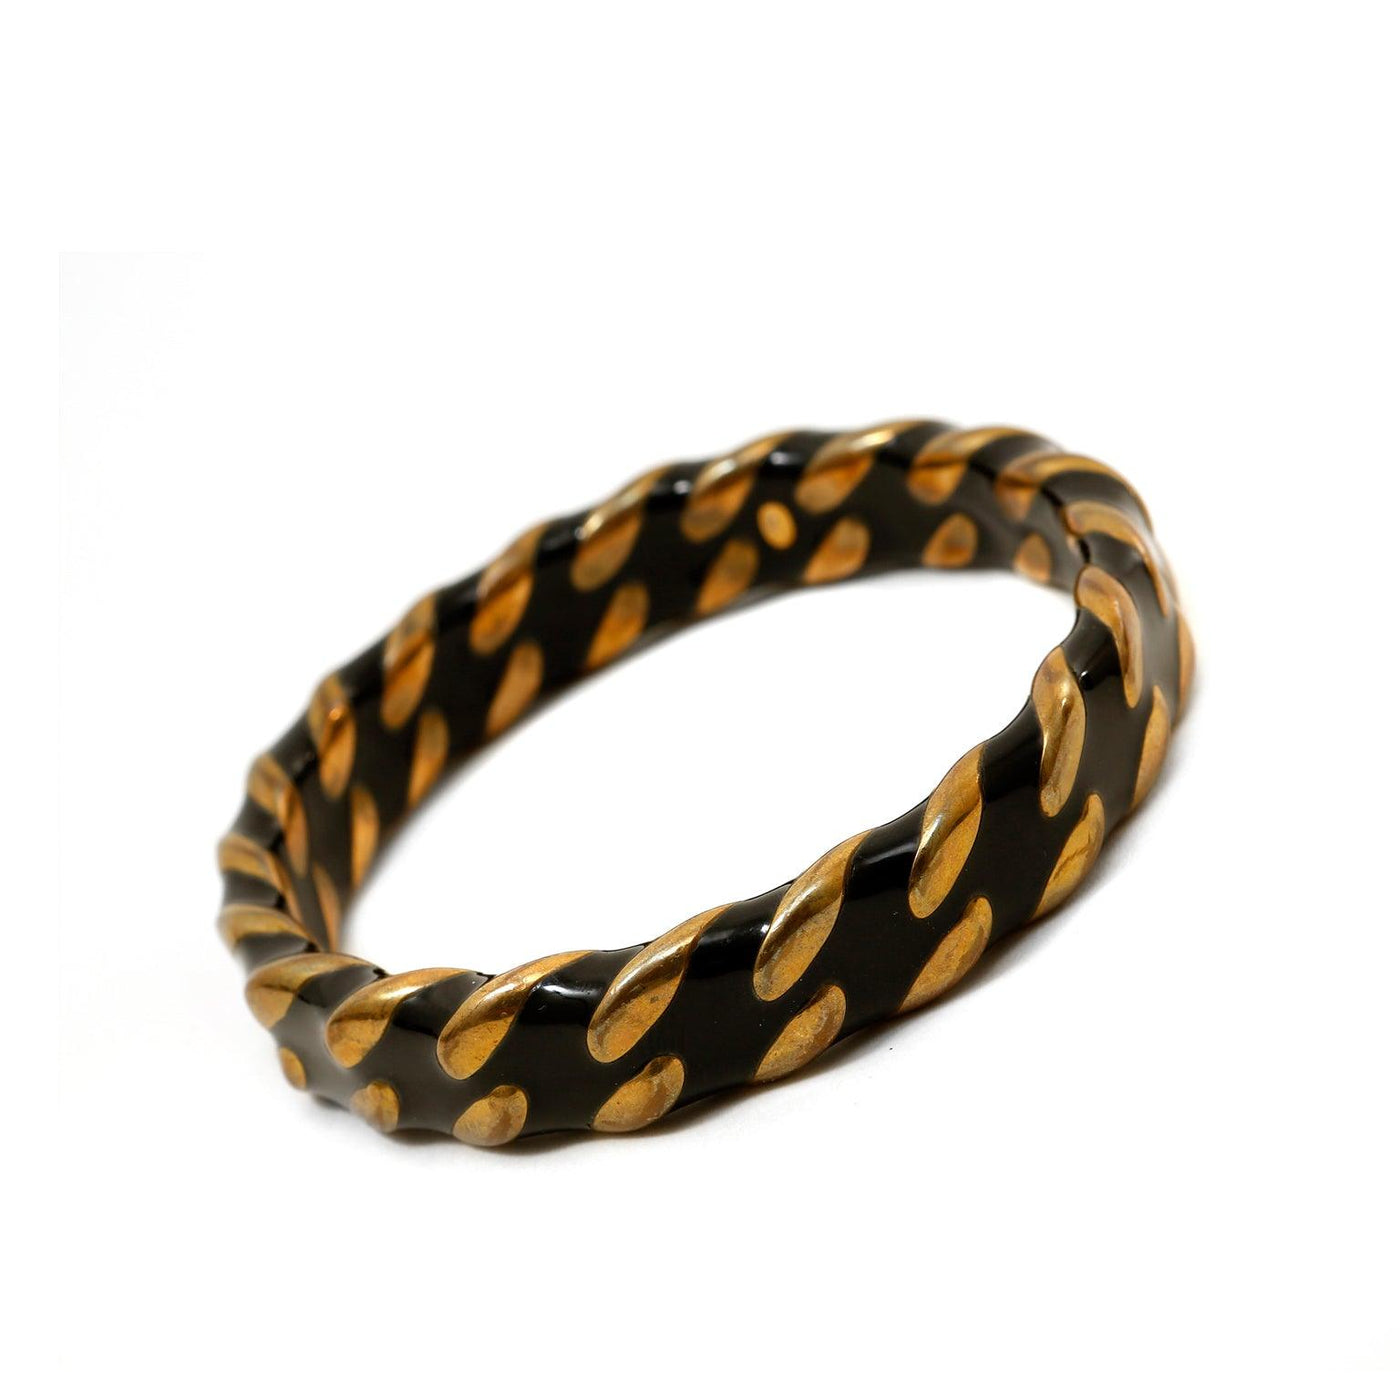 Chanel Black and Gold Poured Bangle Bracelet - Only Authentics